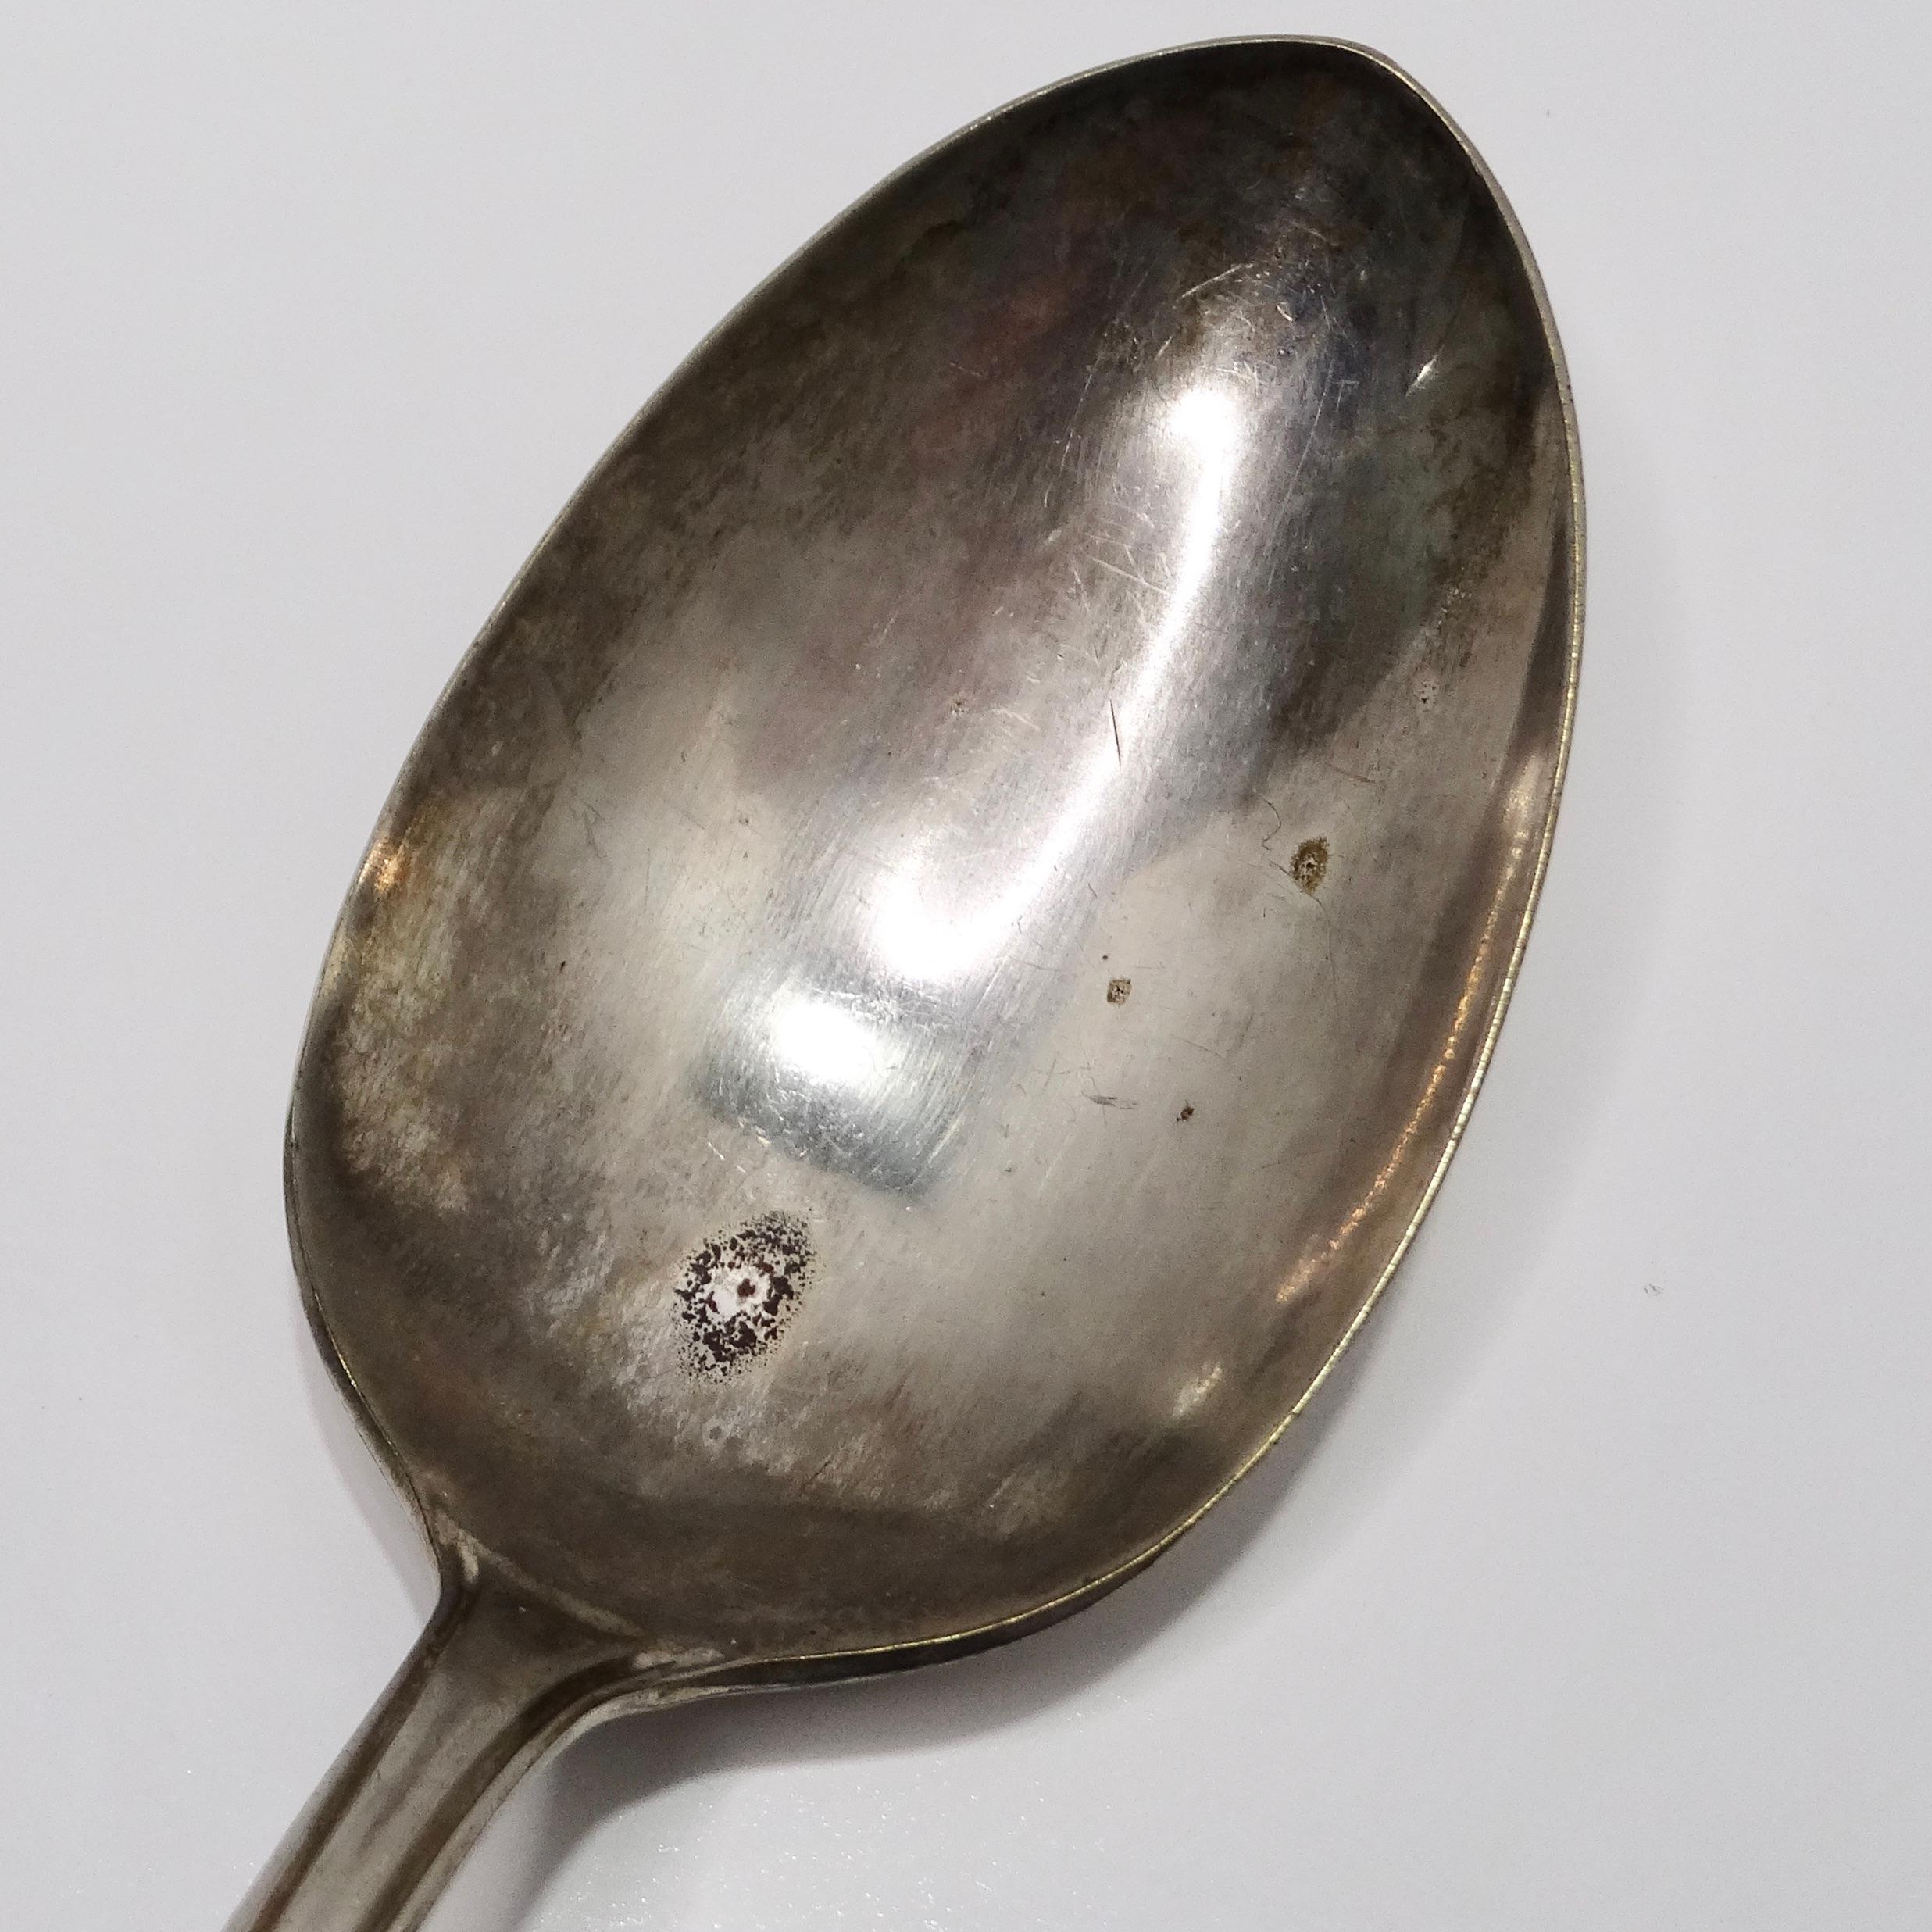 Introducing the Antique Sterling Silver Shell Spoon, a captivating piece from the early 1900s that exudes timeless elegance and sophistication.

Crafted from pure sterling silver, this exquisite spoon features a delicate white shell motif at the